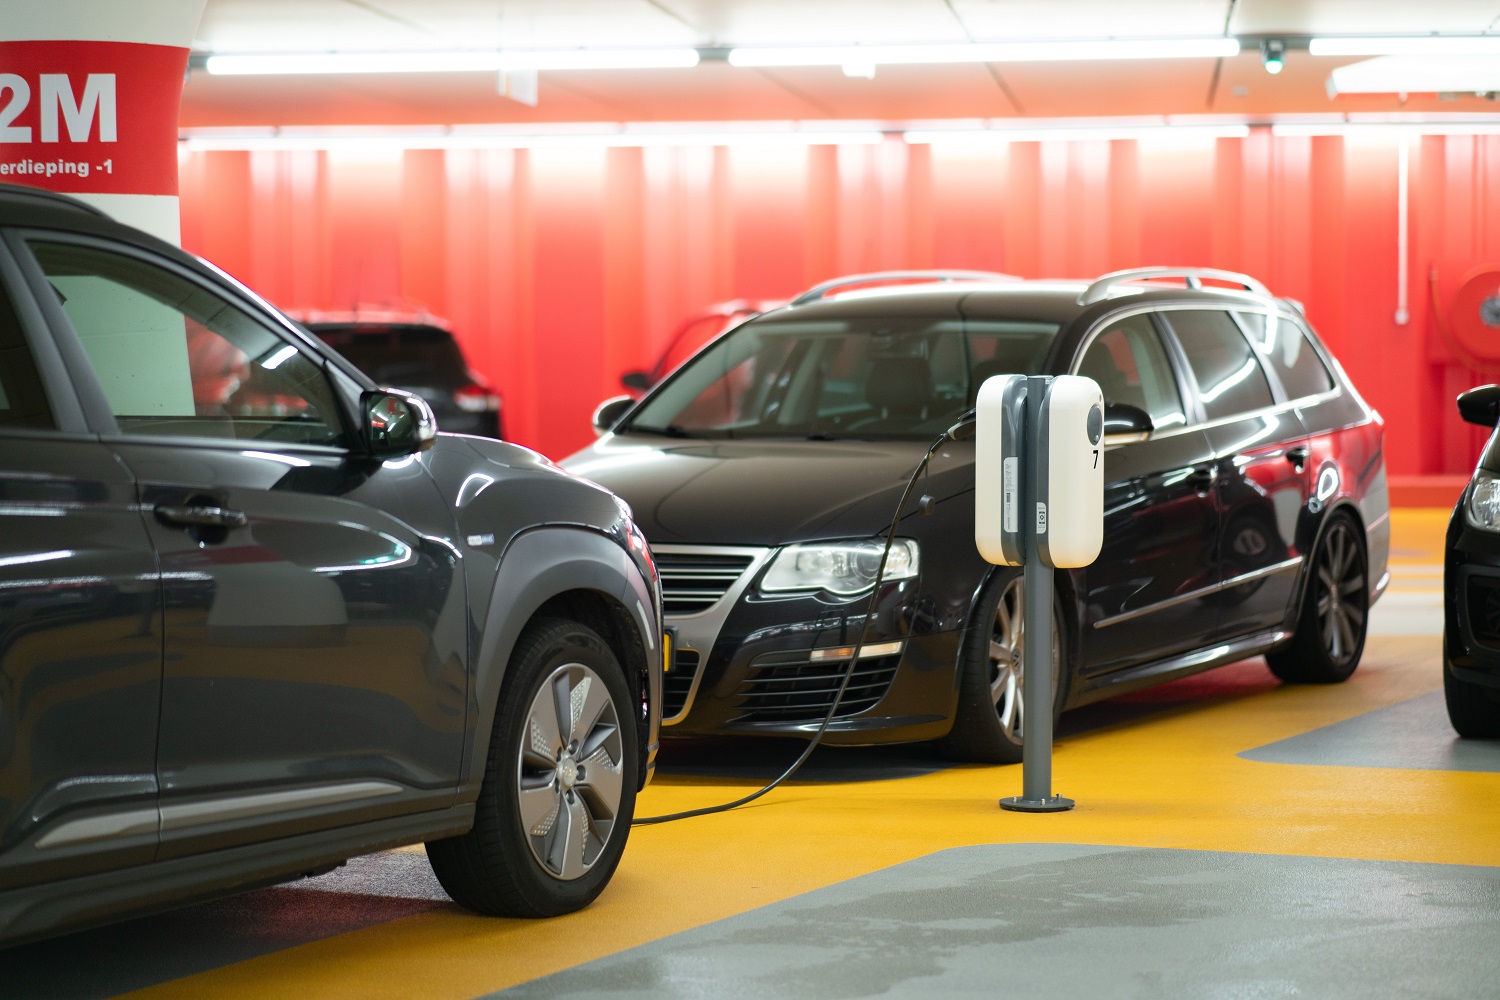 Can the grid handle charging lots of electric cars?